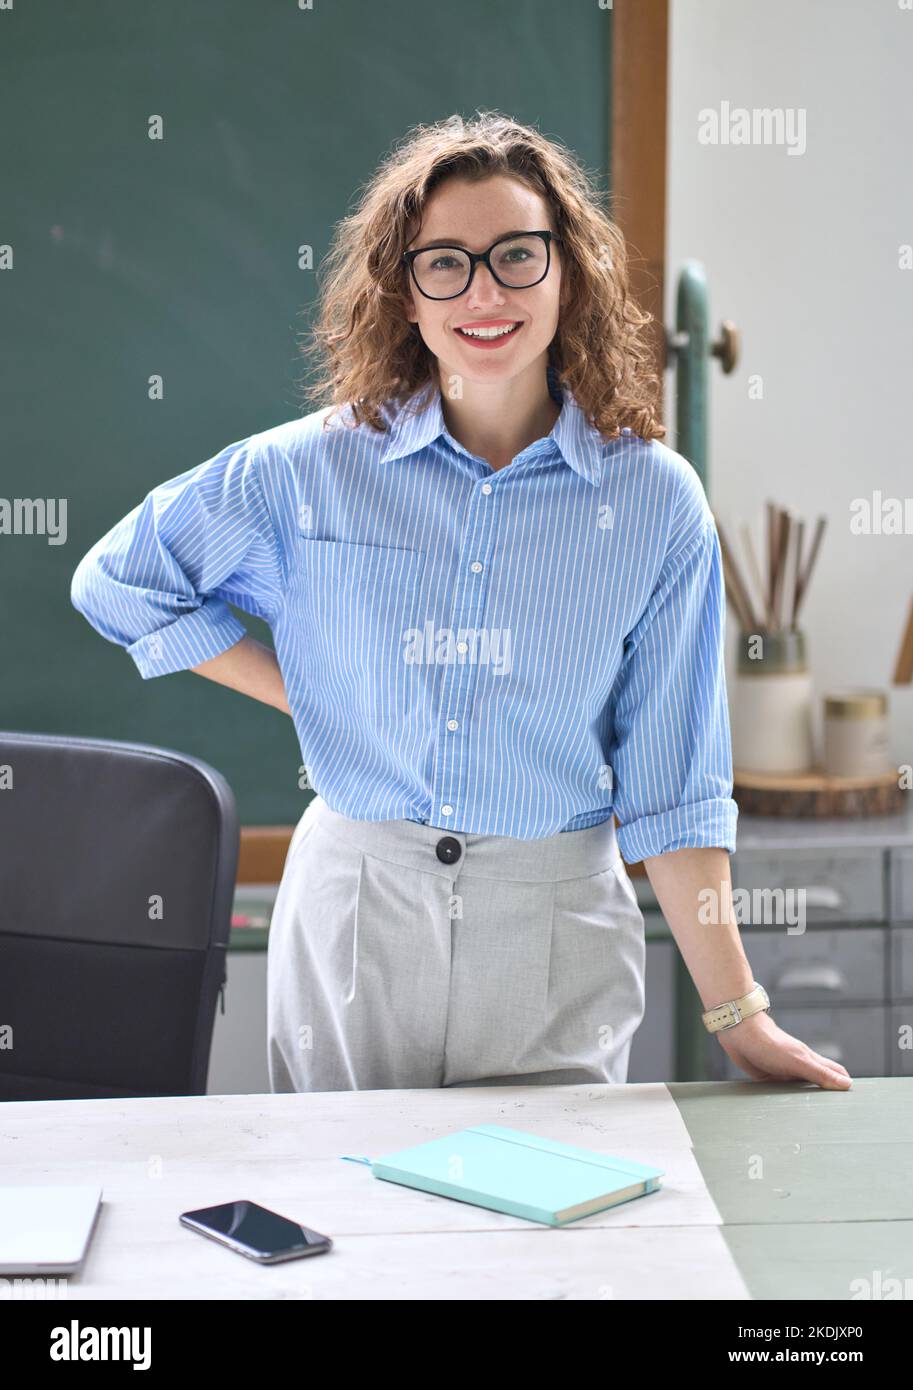 Young happy woman teacher coach standing at desk in classroom office. Portrait Stock Photo